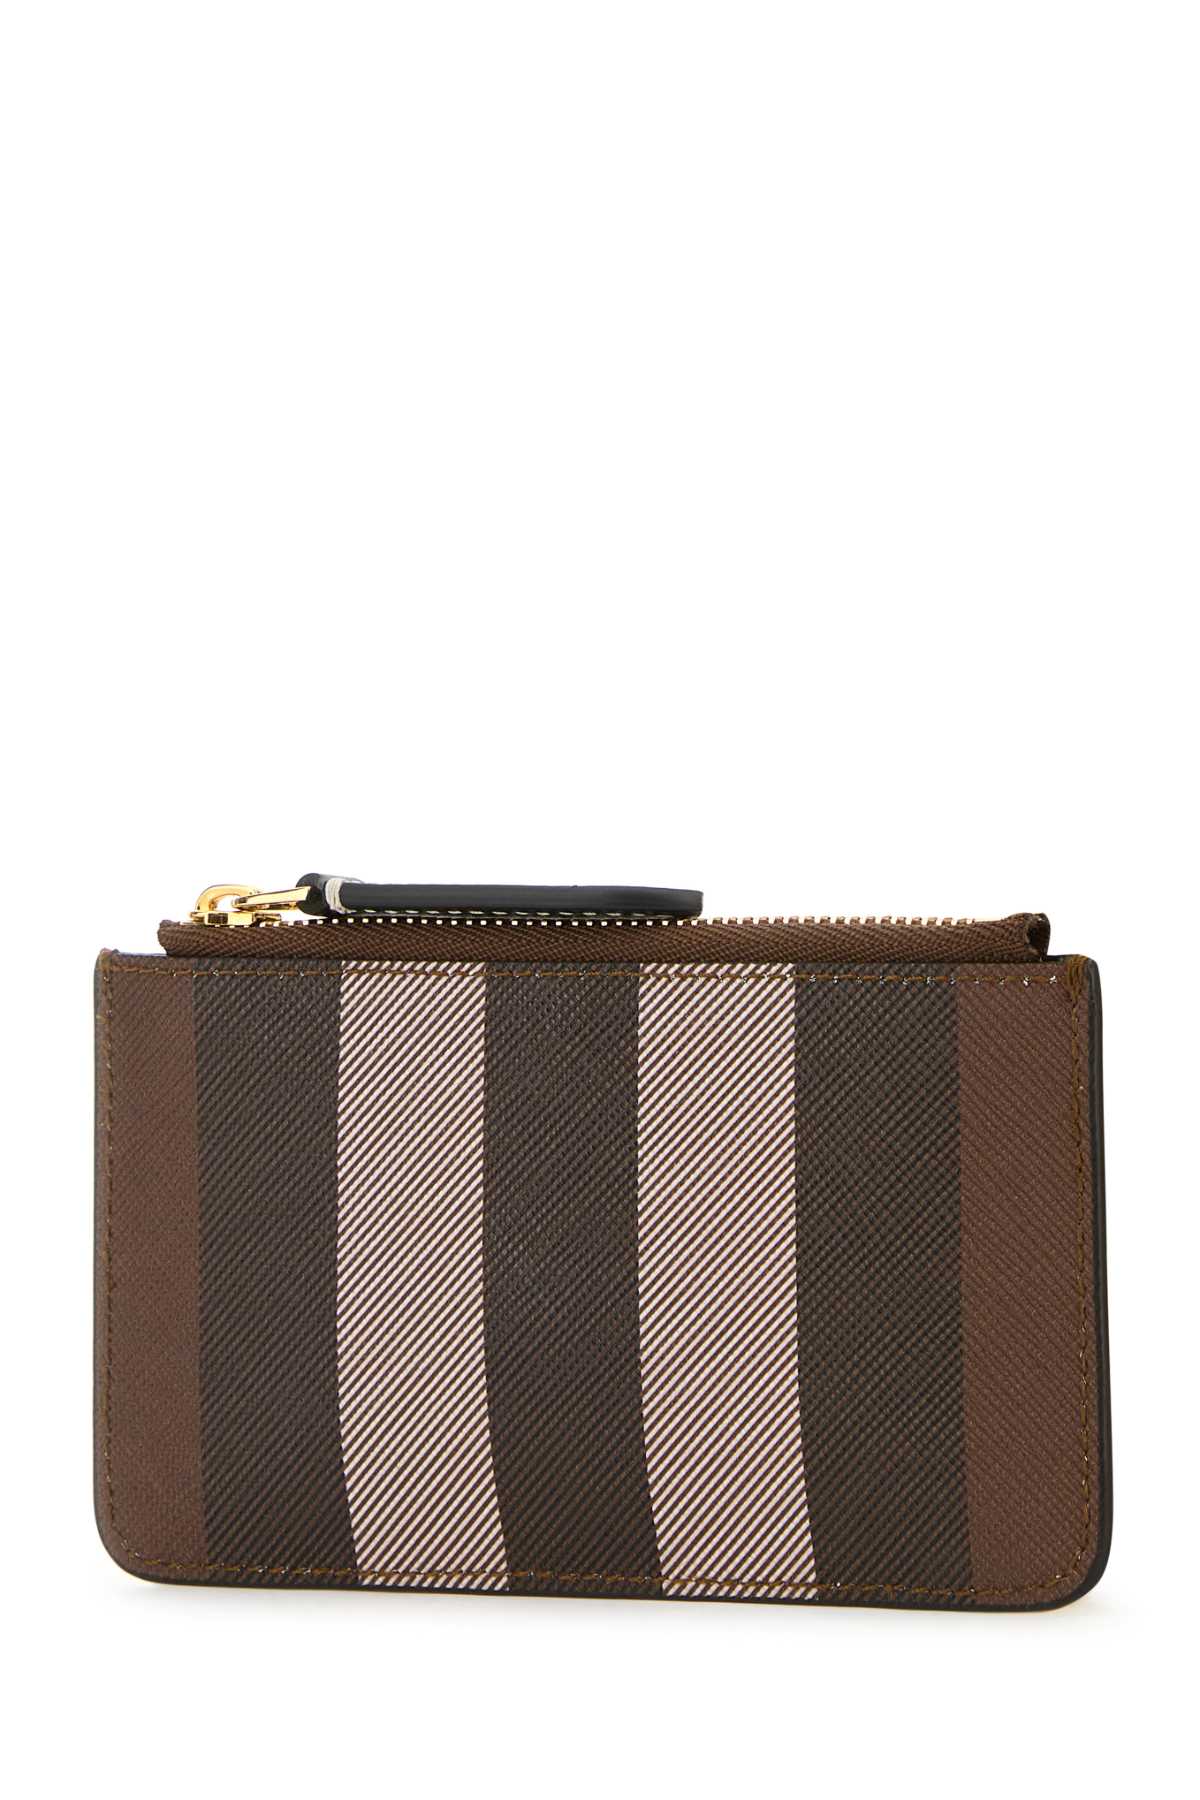 Shop Burberry Printed Canvas Coin Purse In A8900